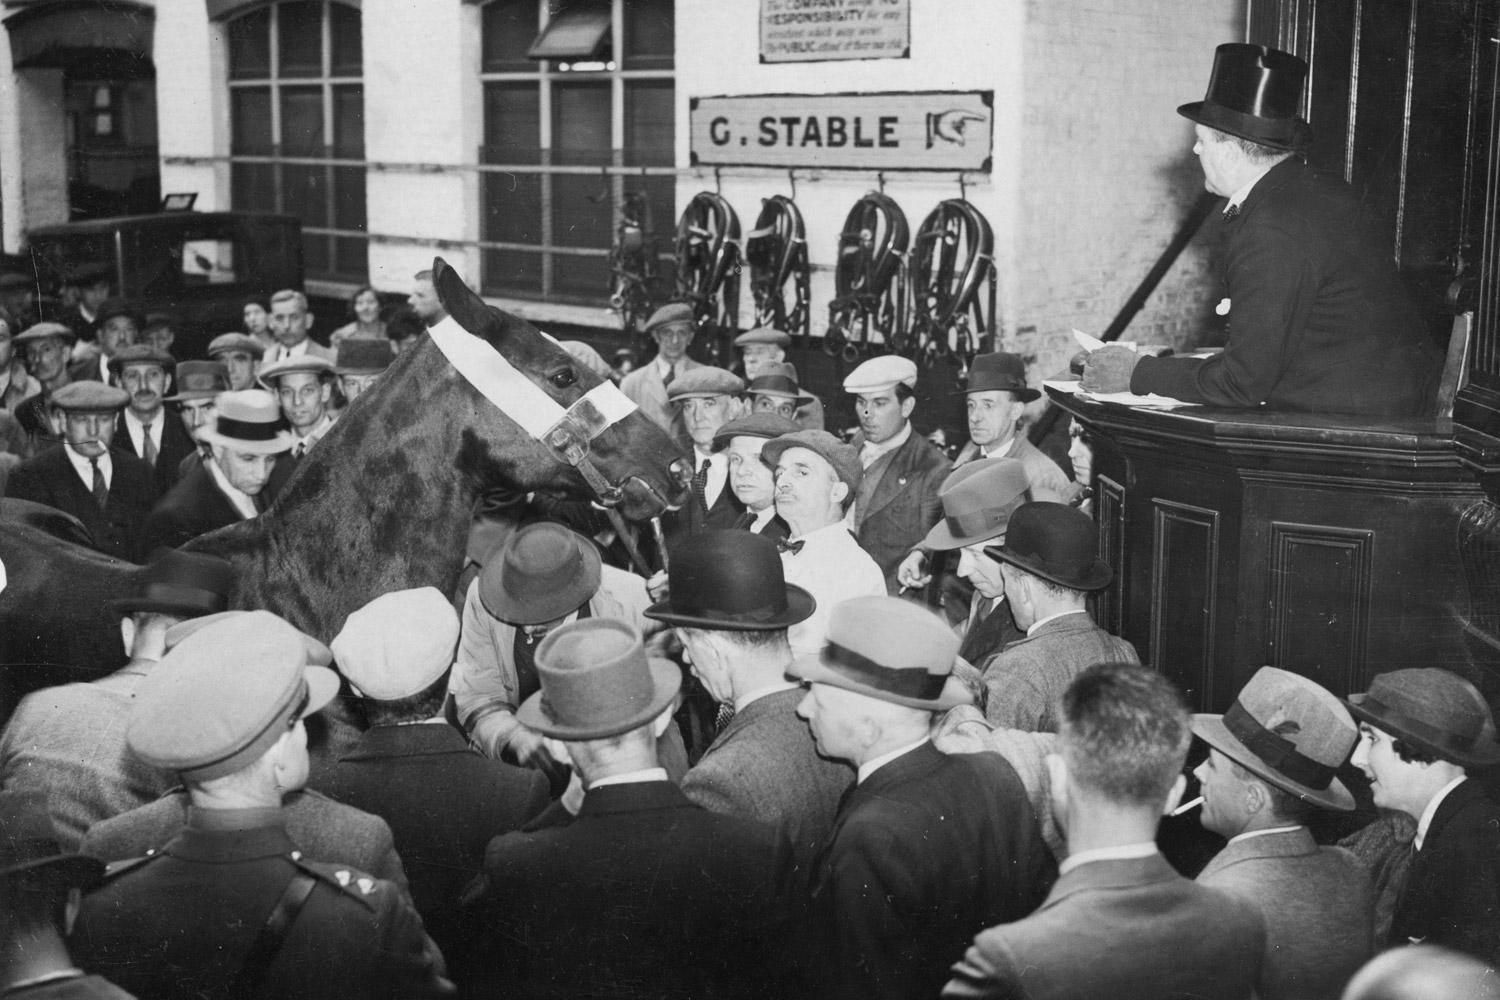 New Kent Road 1937, an auction of army horses in progress at the Elephant and Castle Horse Repository. at 16-18 New Kent Road, where the shopping centre stands today..jpg